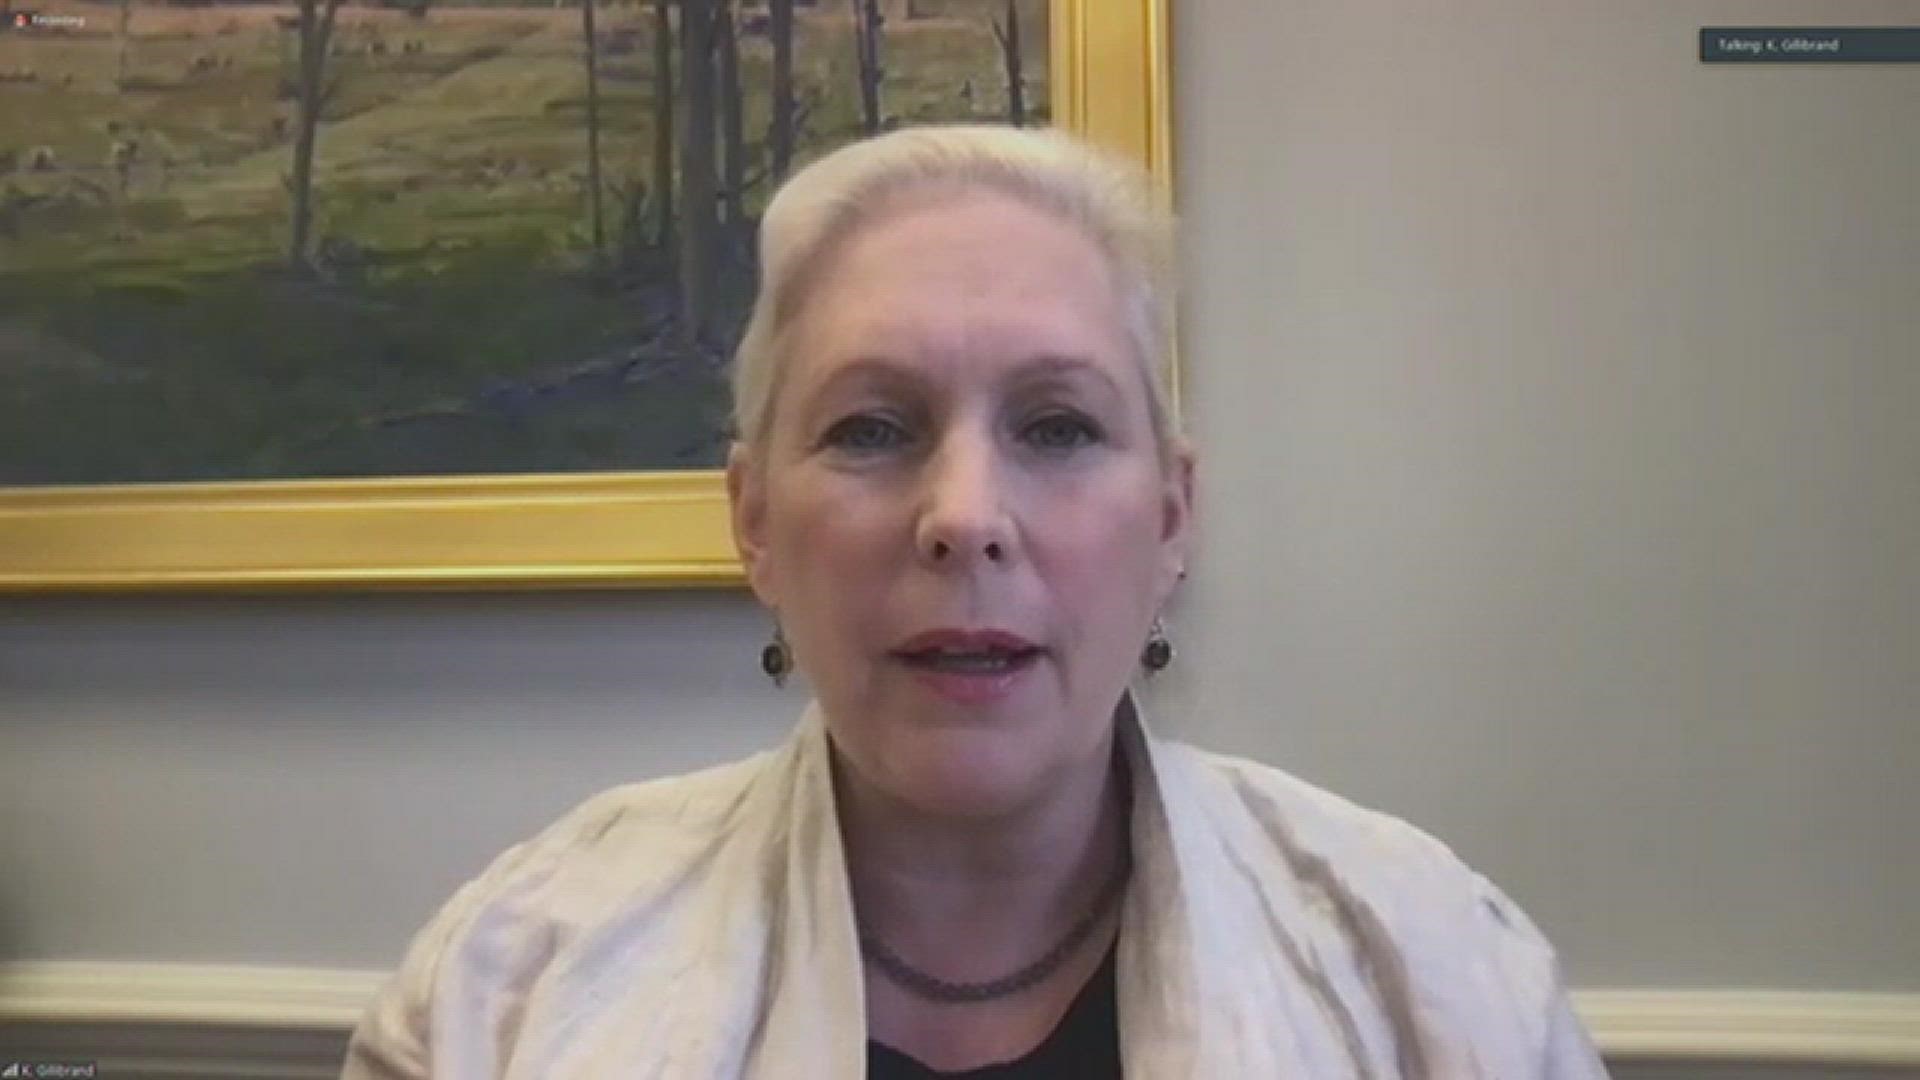 Senator Kirsten Gillibrand calls for emergency energy assistance for low-income New Yorkers.